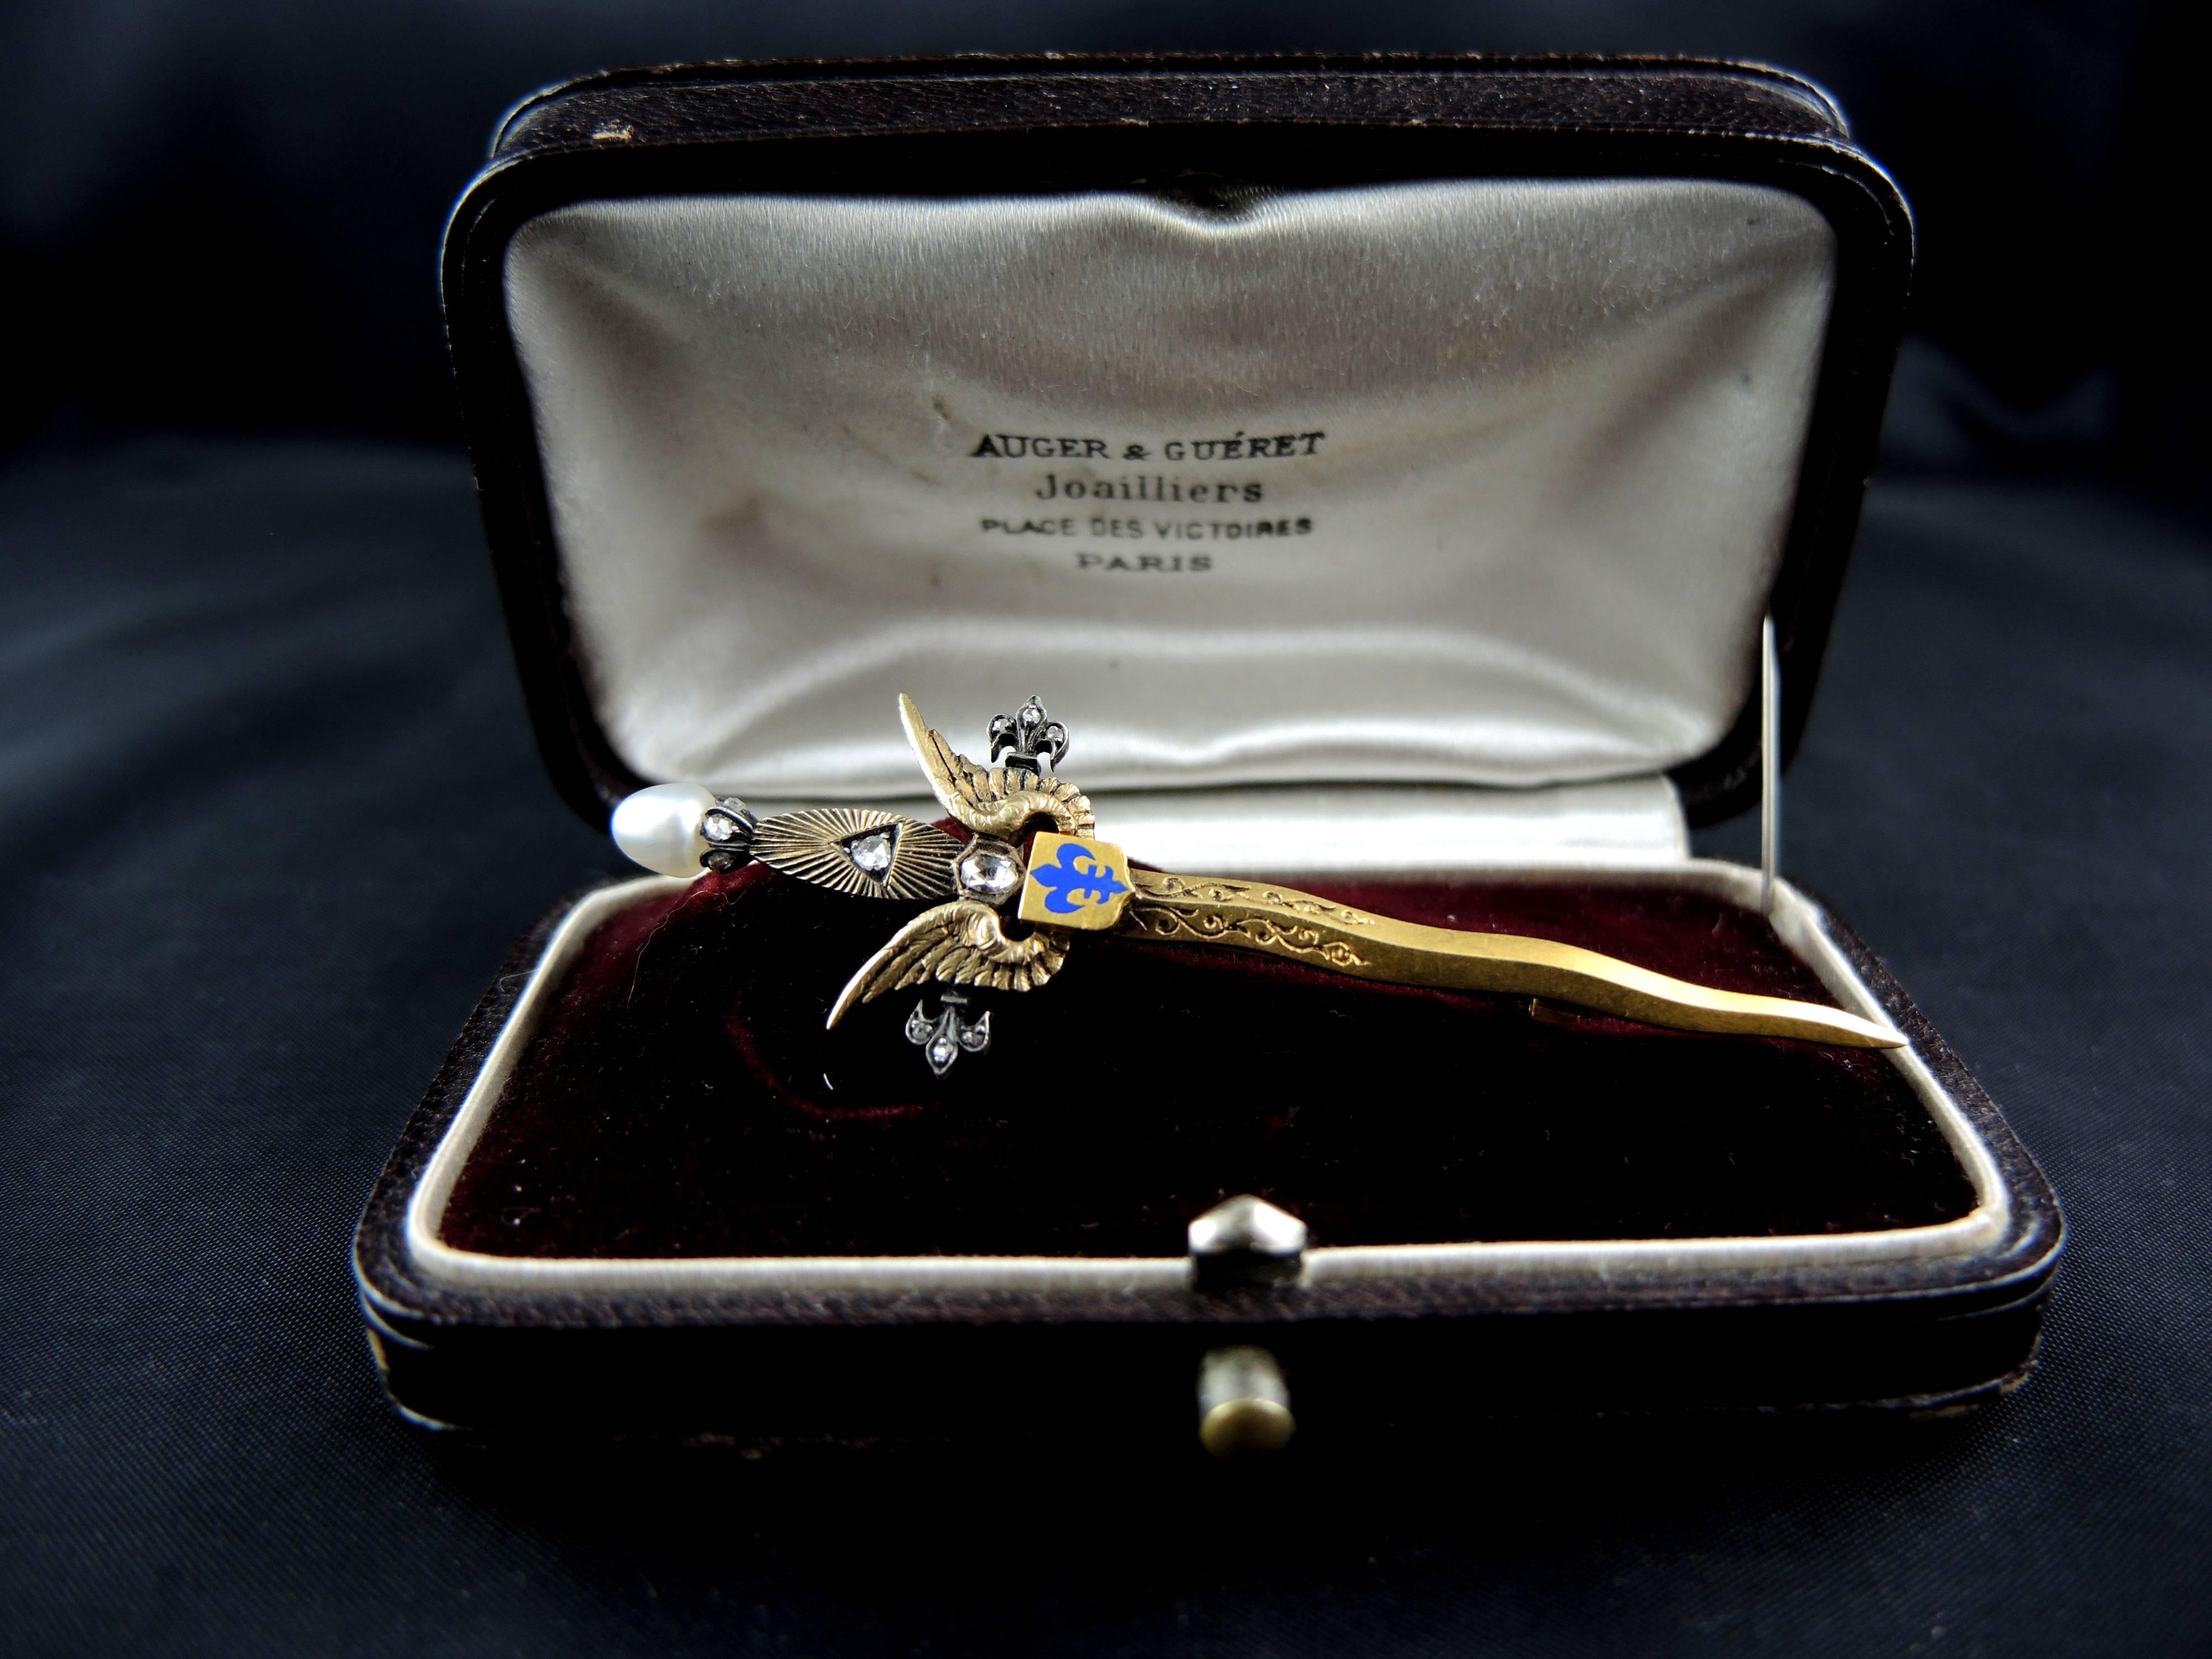 Vermeil (gold plated silver) royalist sword brooch, decorated with an enameled fleur-de-lys, and set with rose cut diamonds, total weight estimated around 0,15ct, and a natural pearl.

Sold with its original bow, signed by Auger et Guéret, jeweller